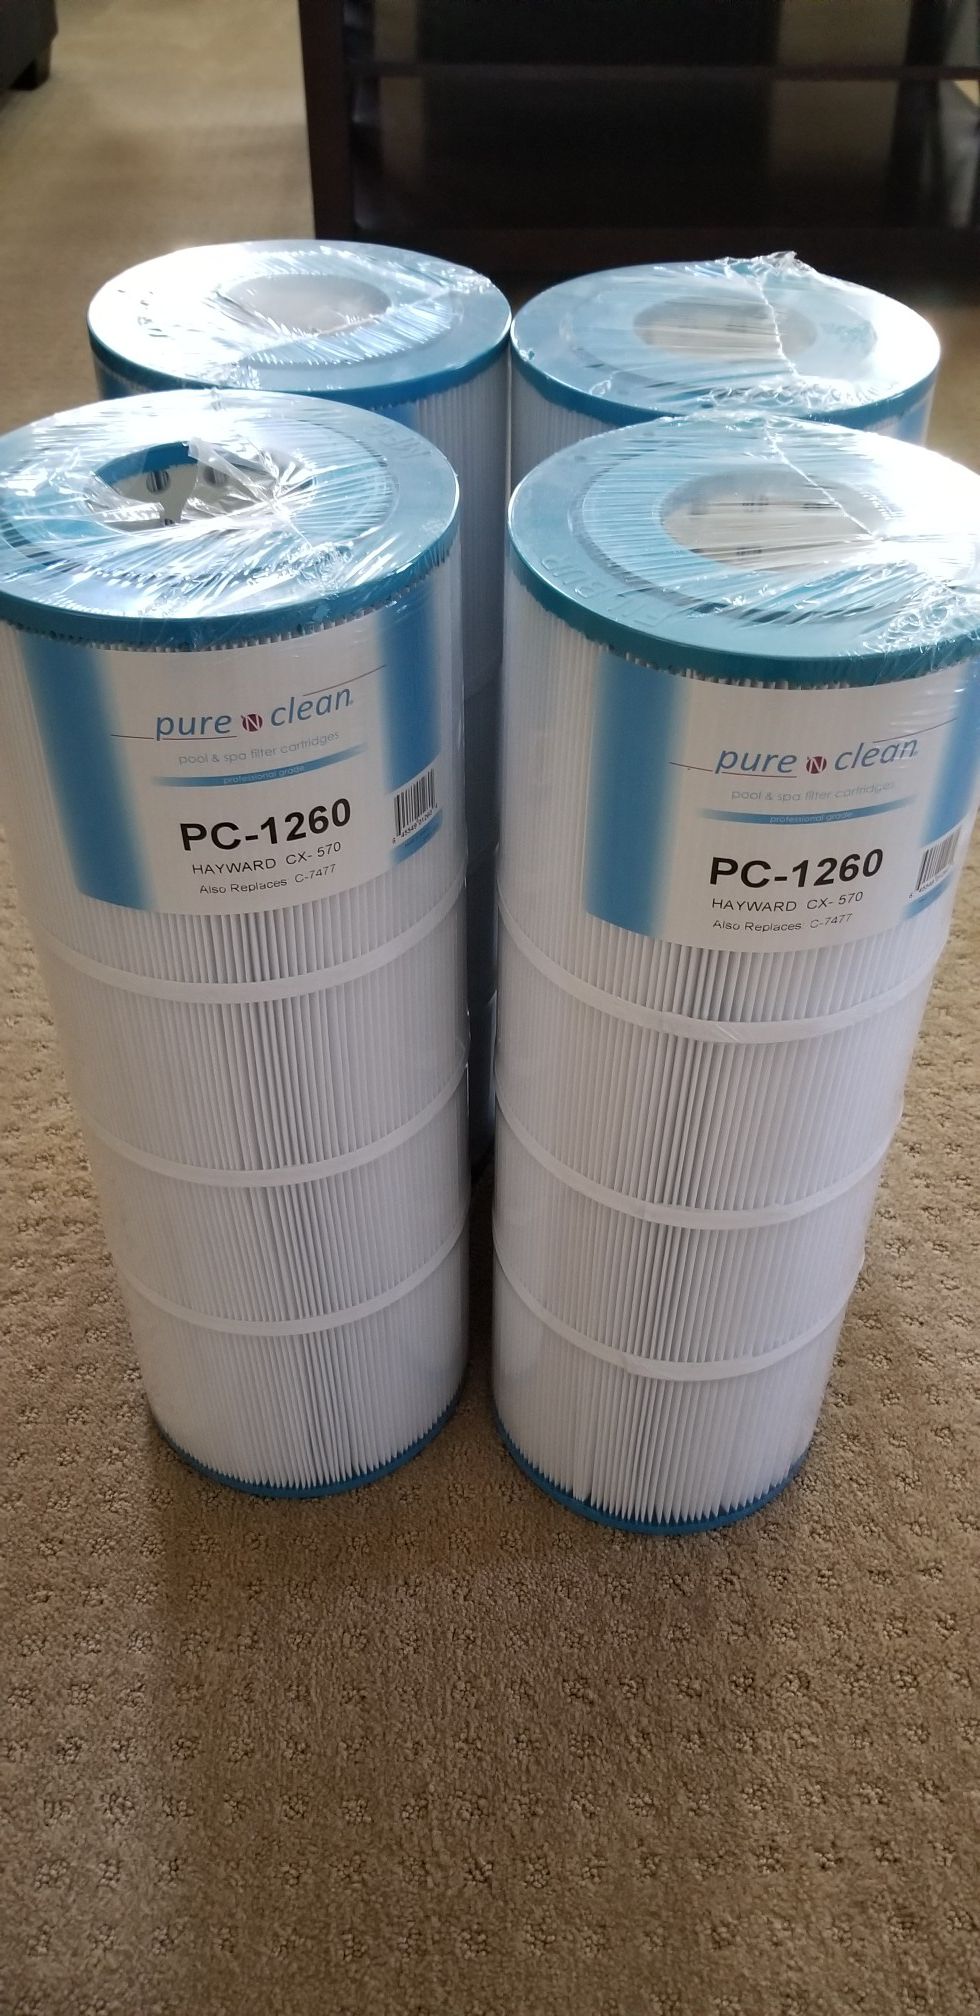 Brand new pool filters